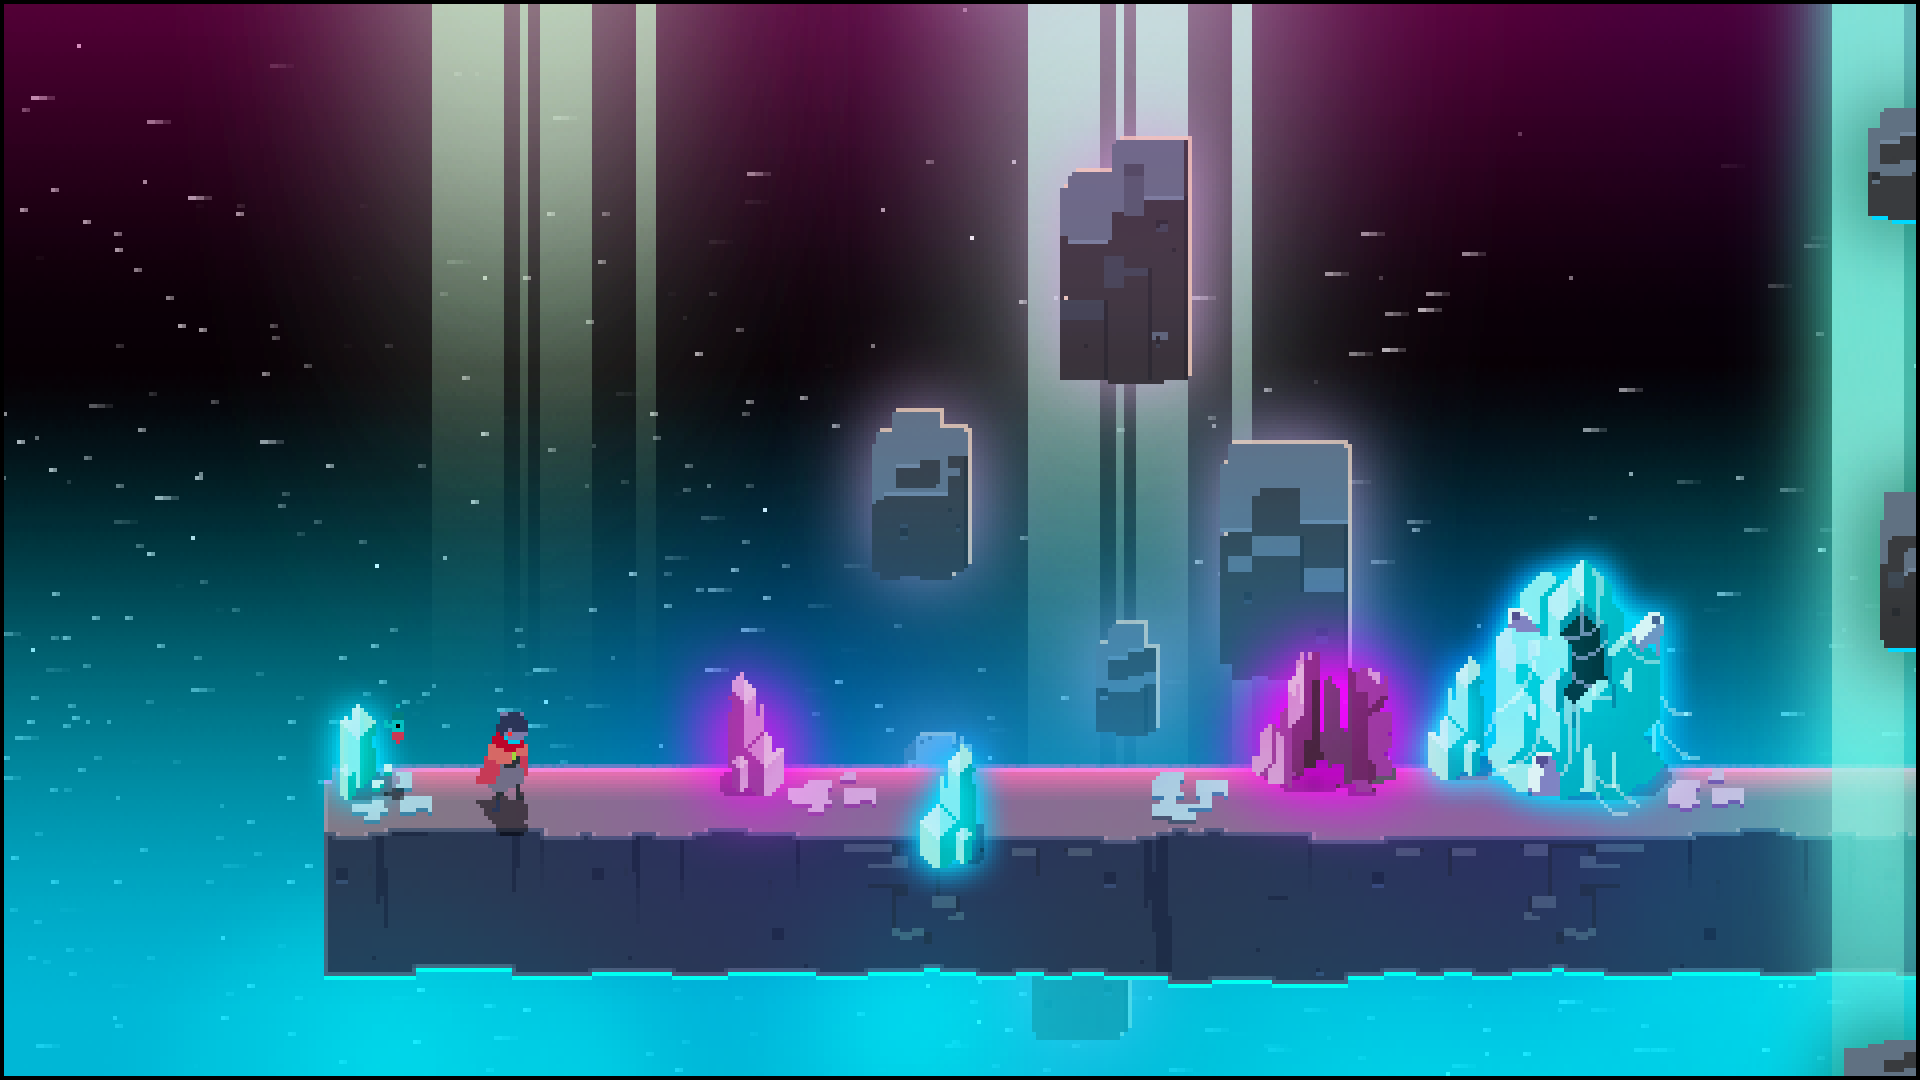 Hyper Light Drifter – Special Edition: Conceptualization and creation of the additional content